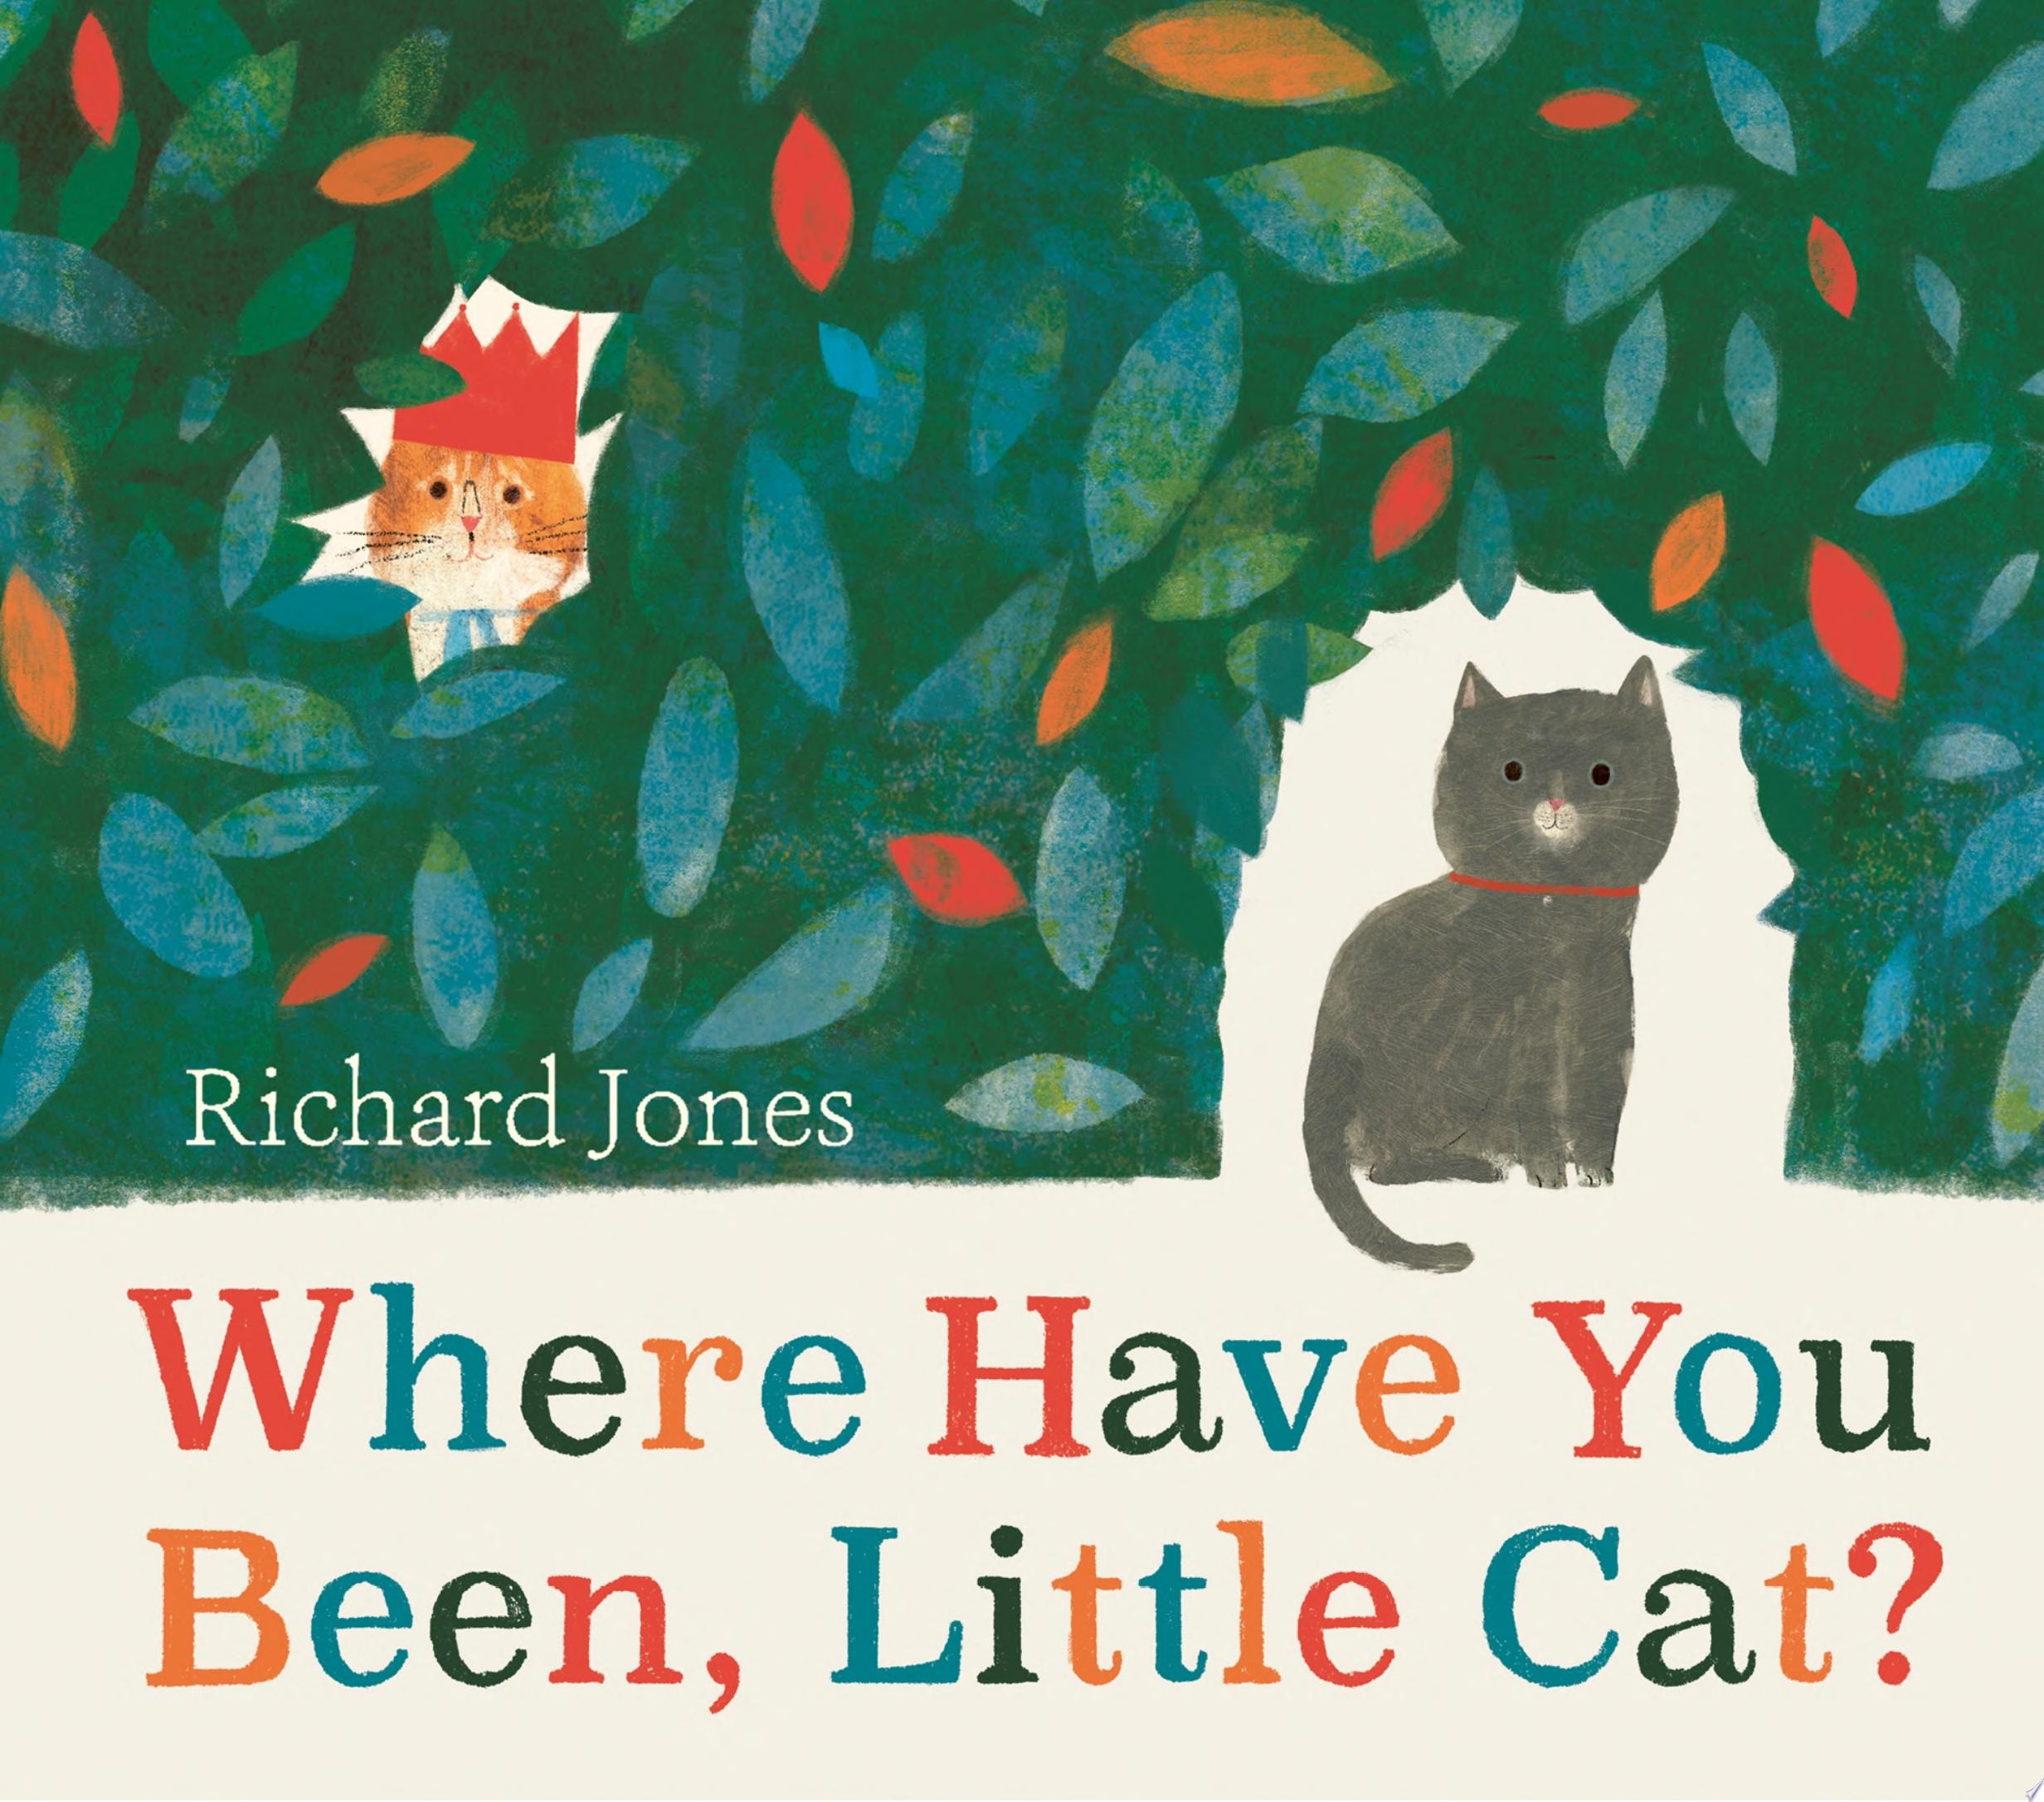 Image for "Where Have You Been, Little Cat?"